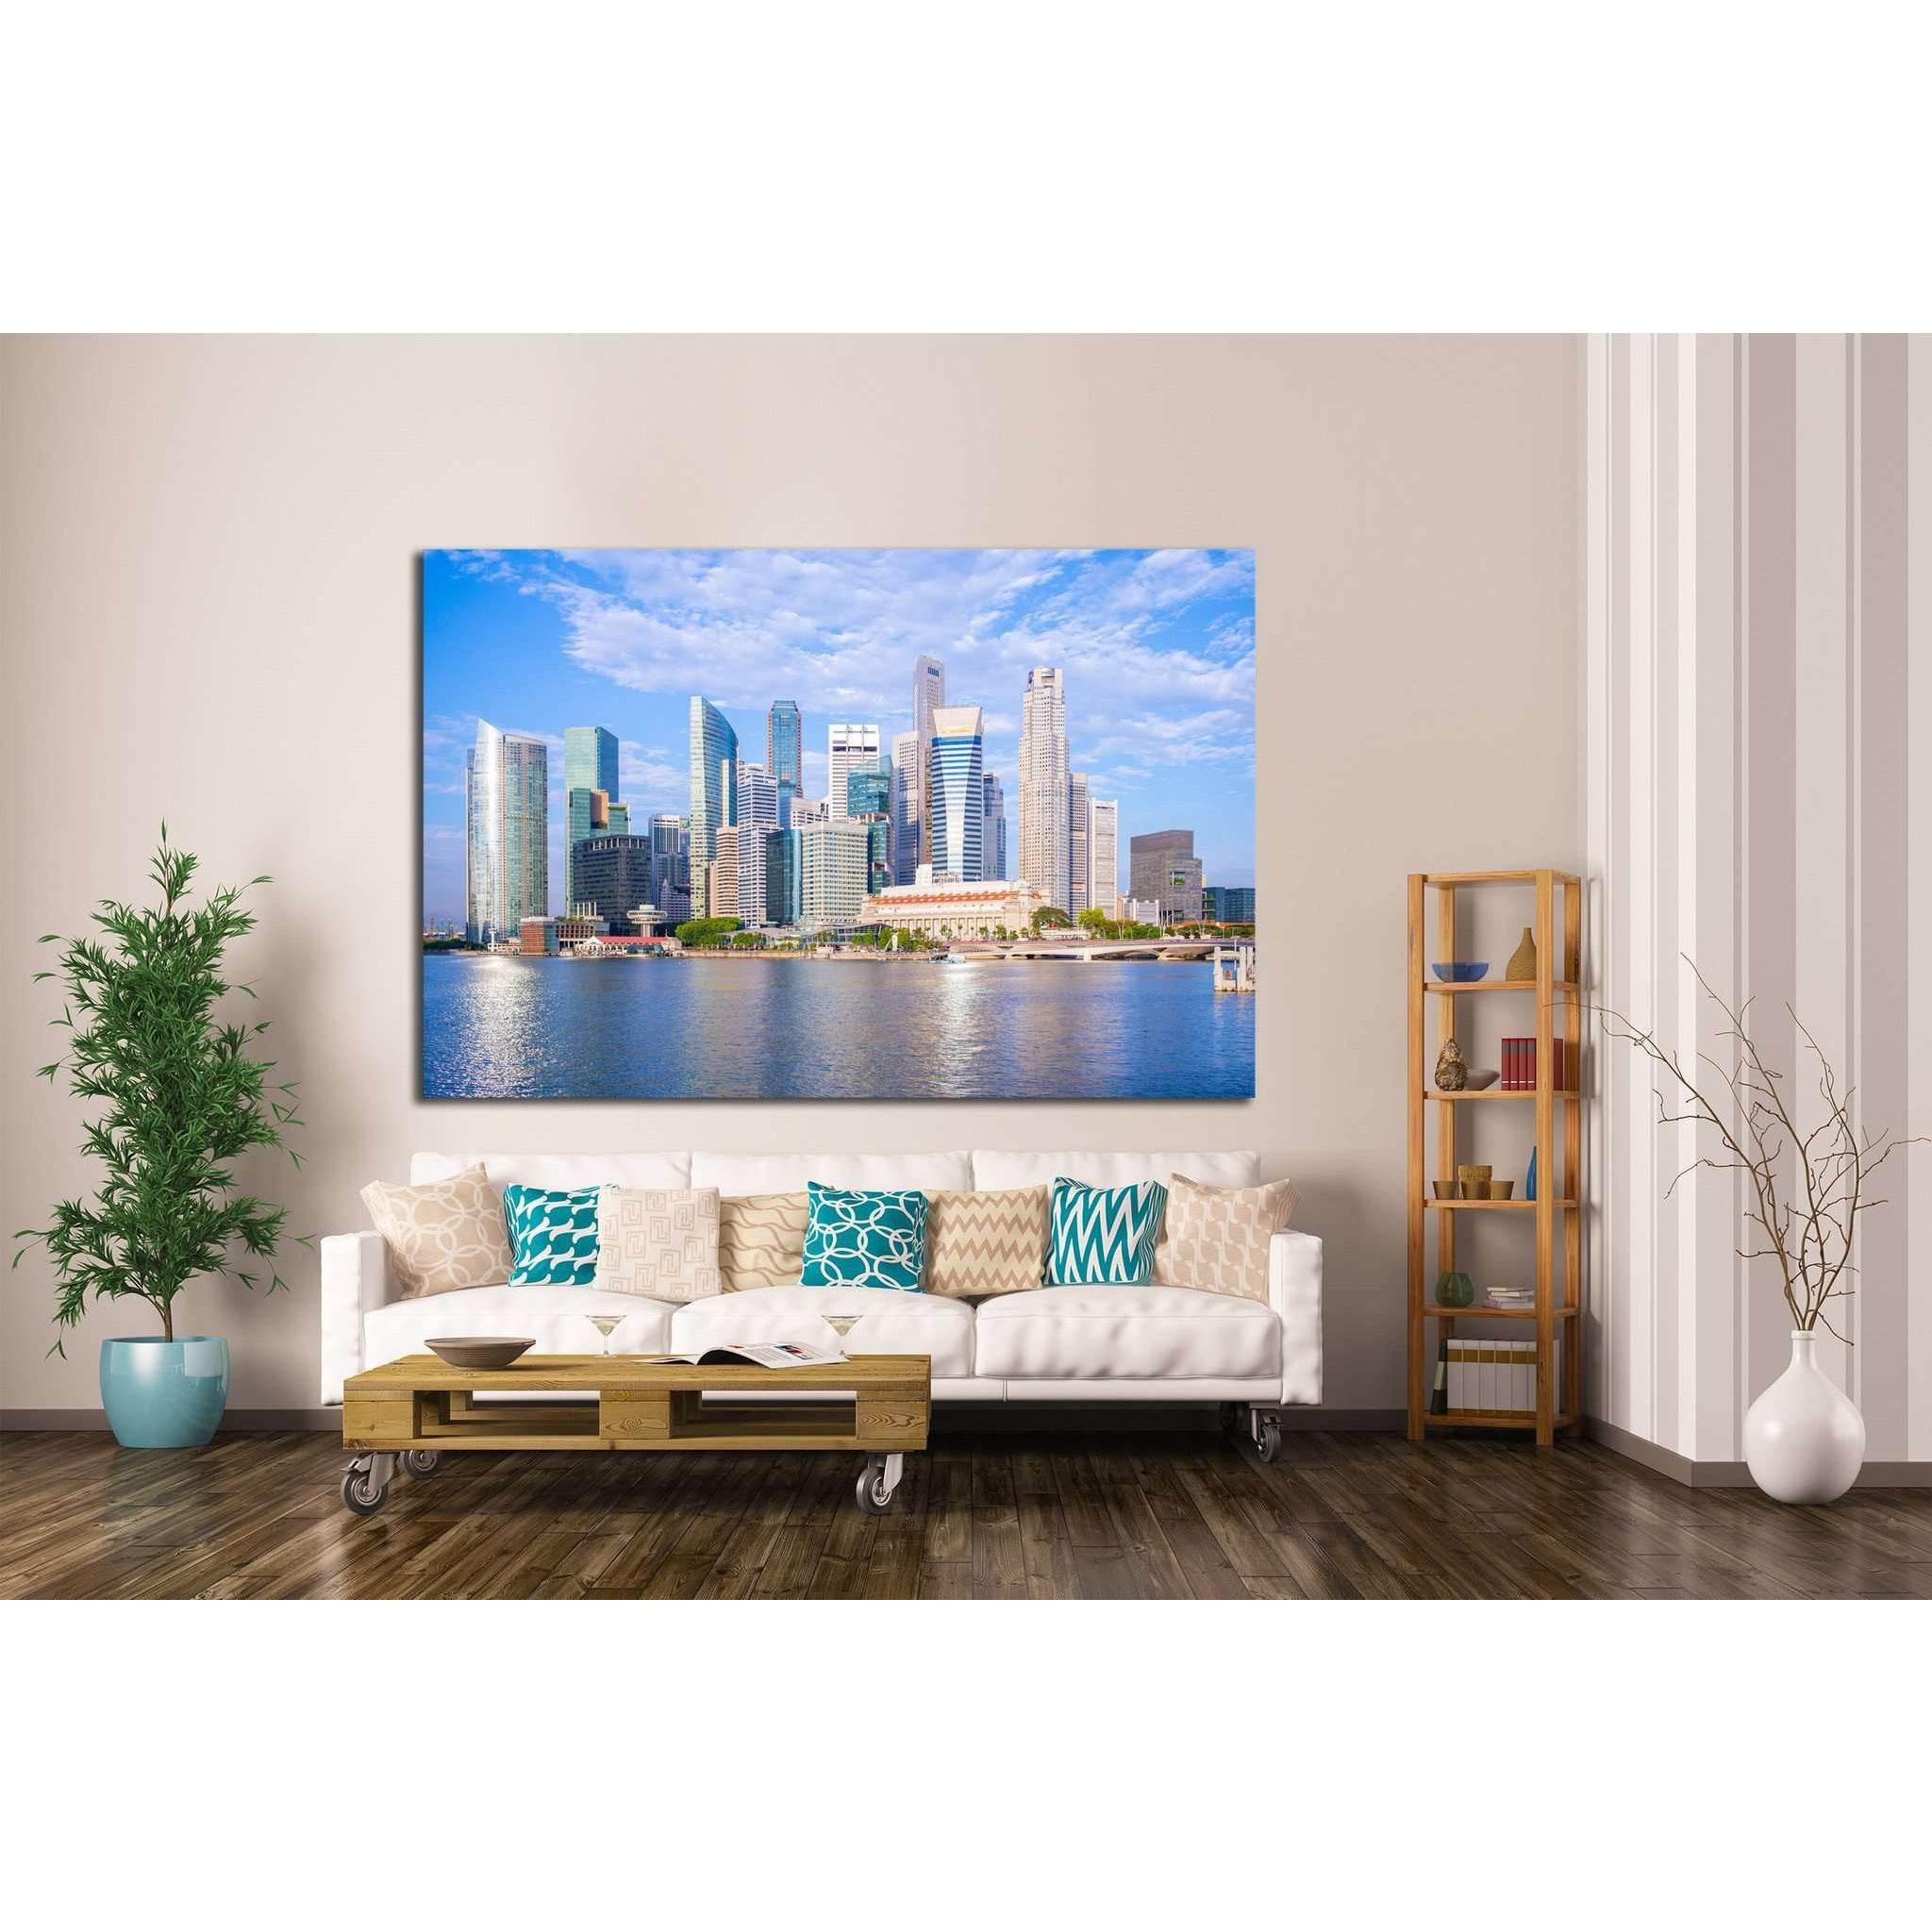 skyline of singapore by the marina bay №1768 Ready to Hang Canvas Print